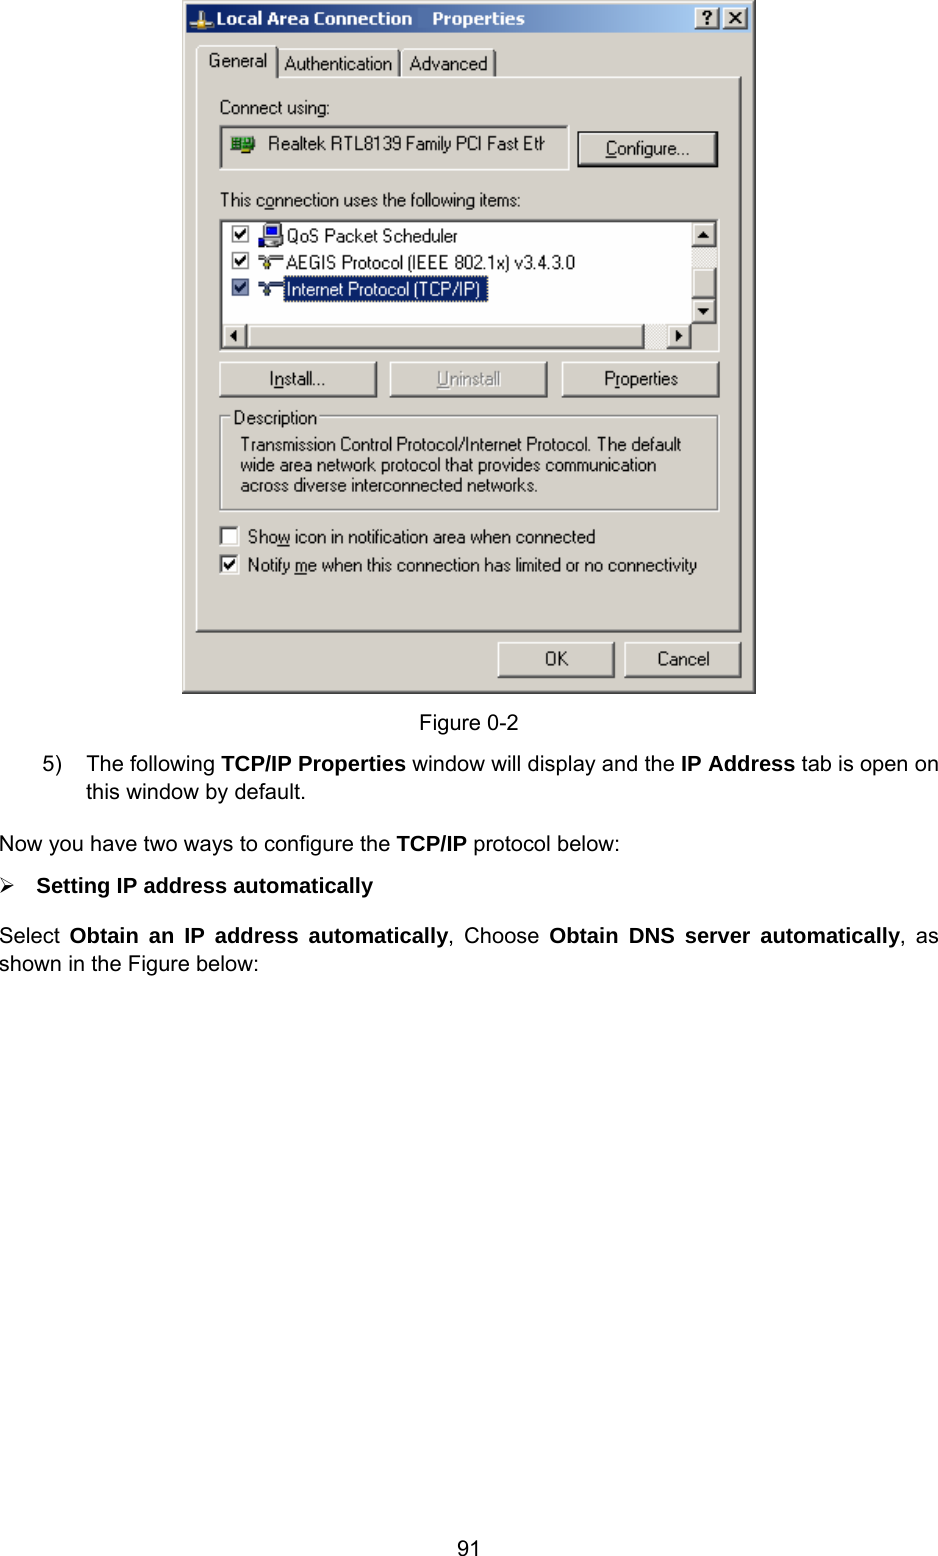  91  Figure 0-2 5) The following TCP/IP Properties window will display and the IP Address tab is open on this window by default. Now you have two ways to configure the TCP/IP protocol below: ¾ Setting IP address automatically Select  Obtain an IP address automatically, Choose Obtain DNS server automatically, as shown in the Figure below: 